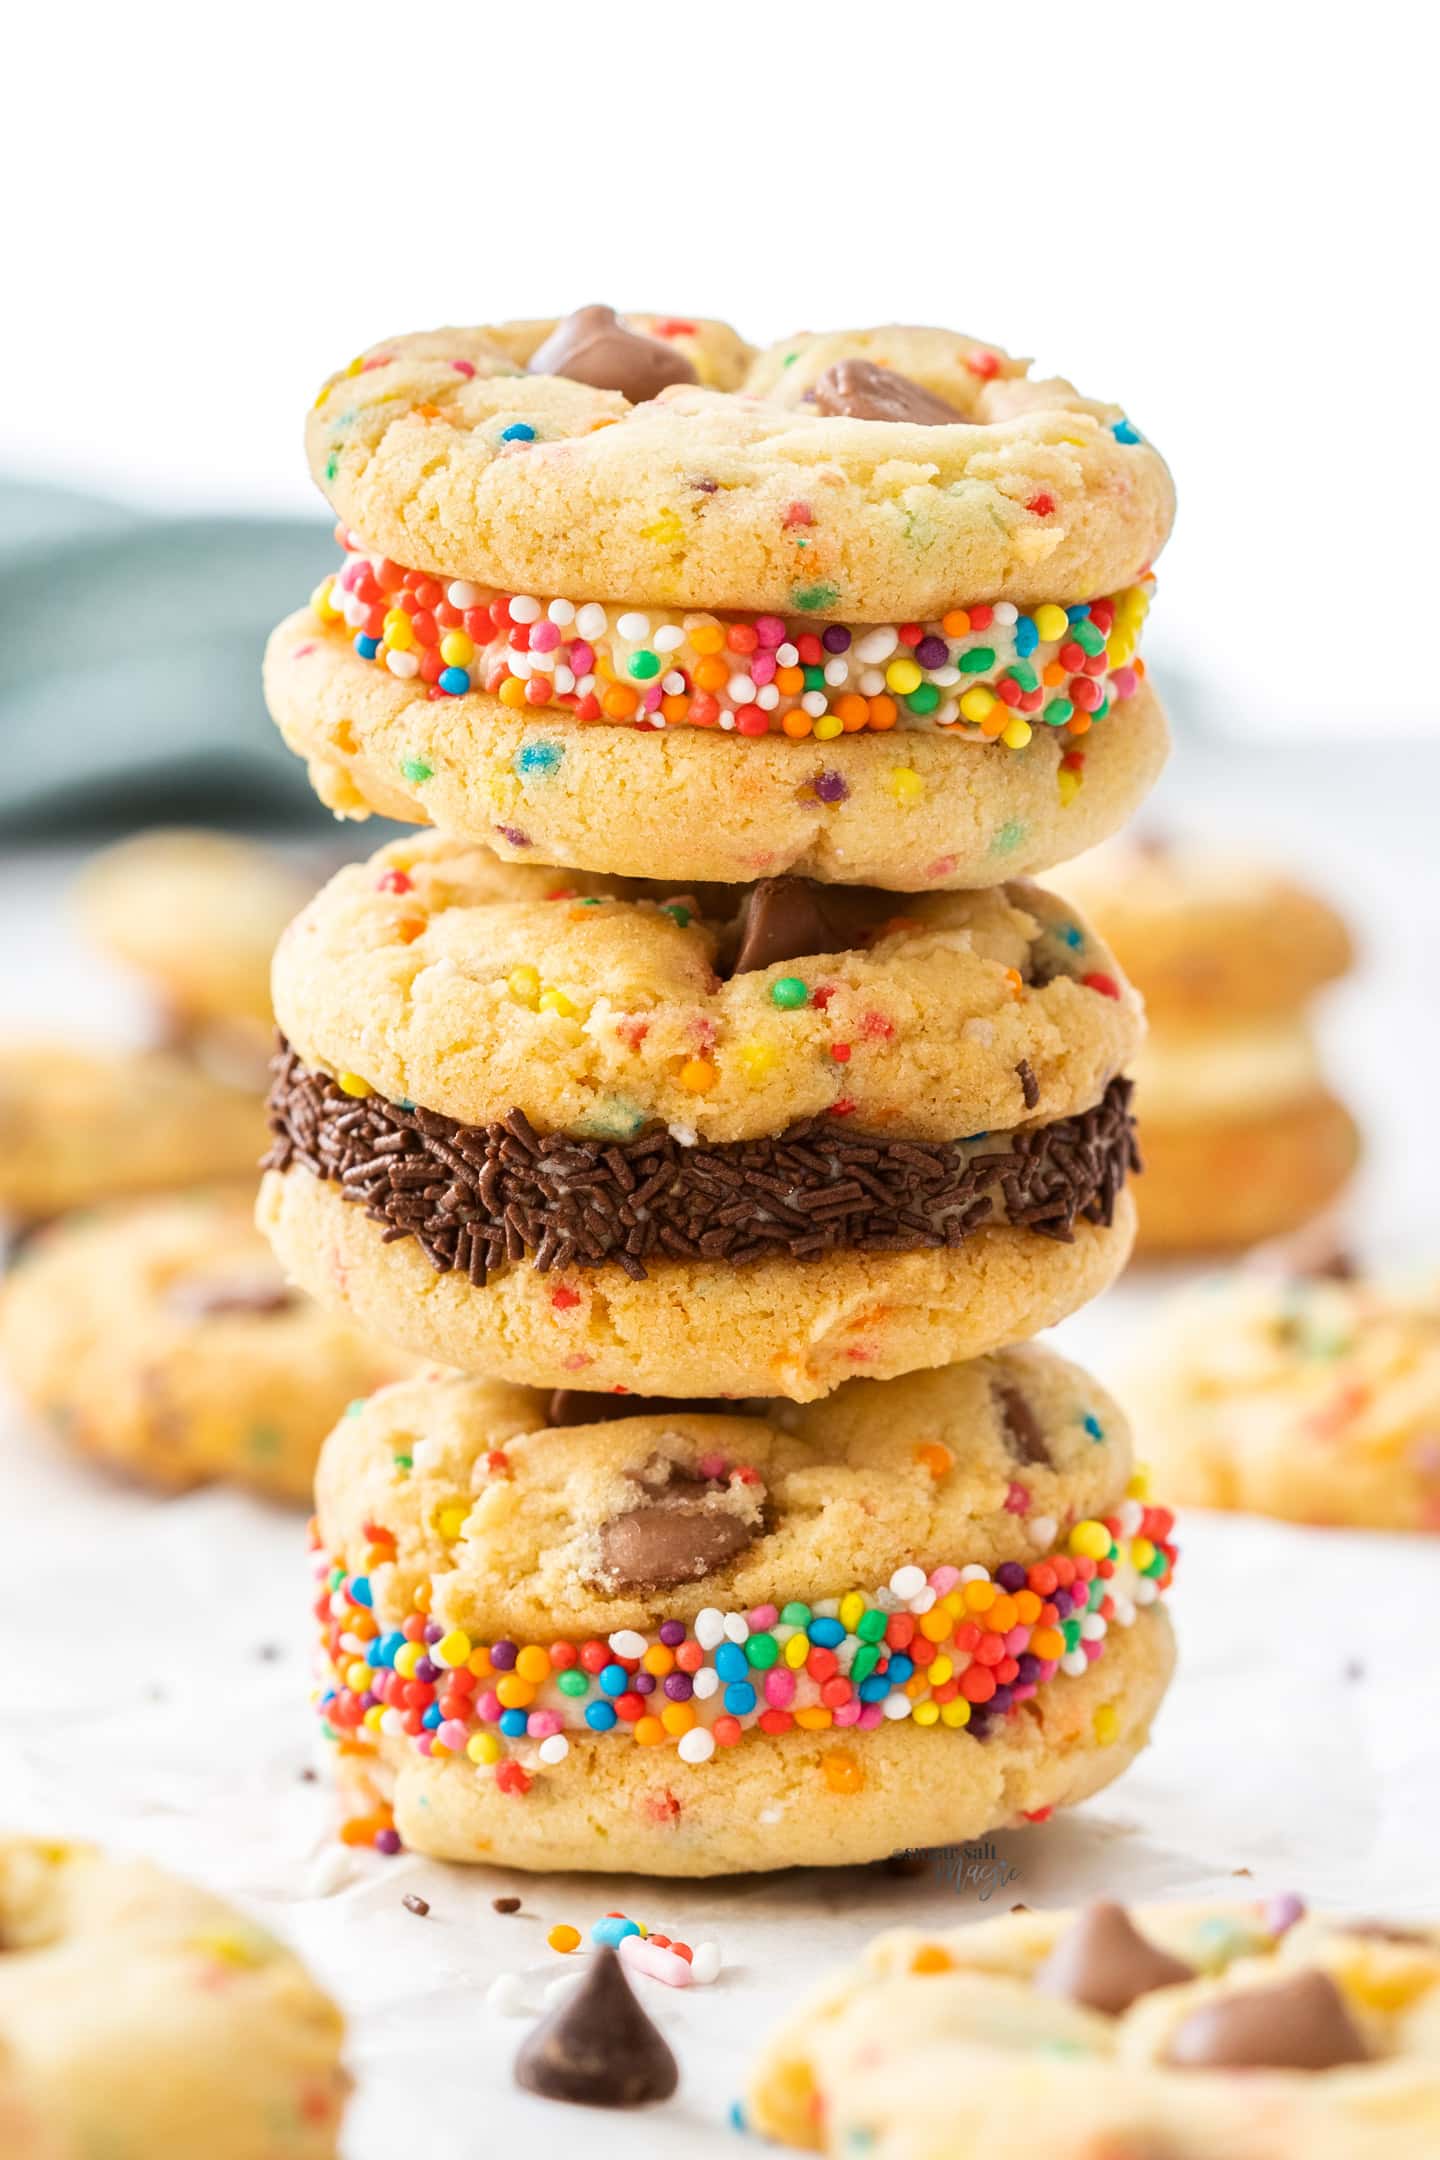 A stack of 3 buttercream-filled birthday cake cookies.